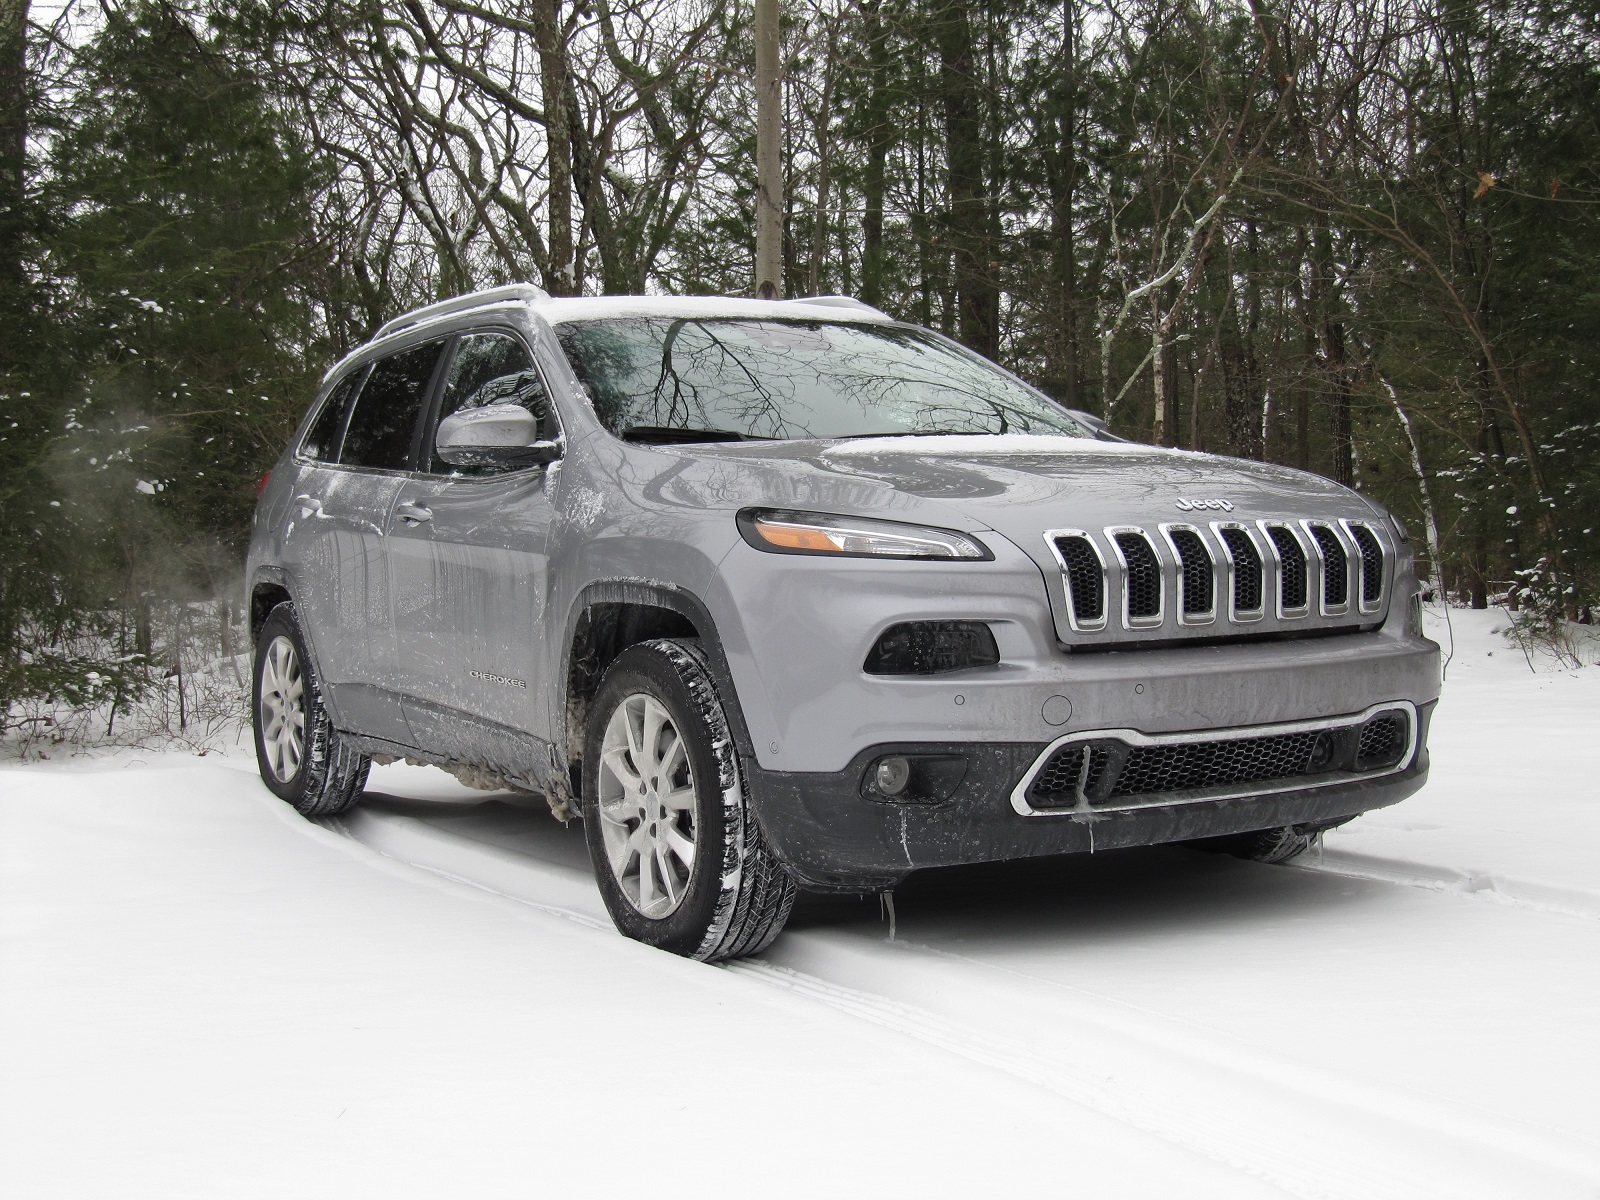 2014 Jeep Cherokee Limited 4X4: Gas Mileage Test With V-6